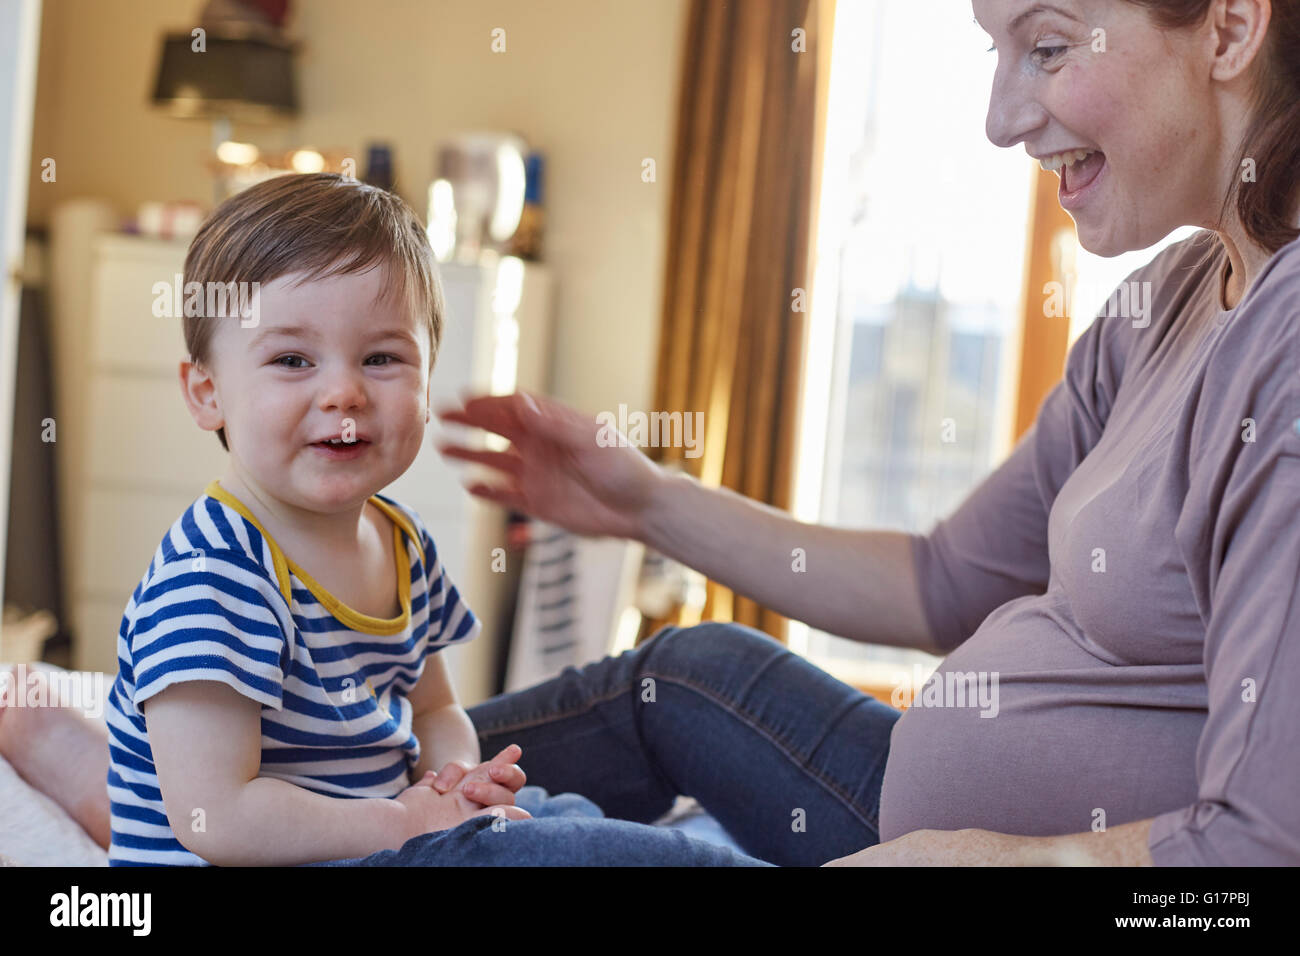 Side view of pregnant mother and baby boy looking at camera smiling Stock Photo